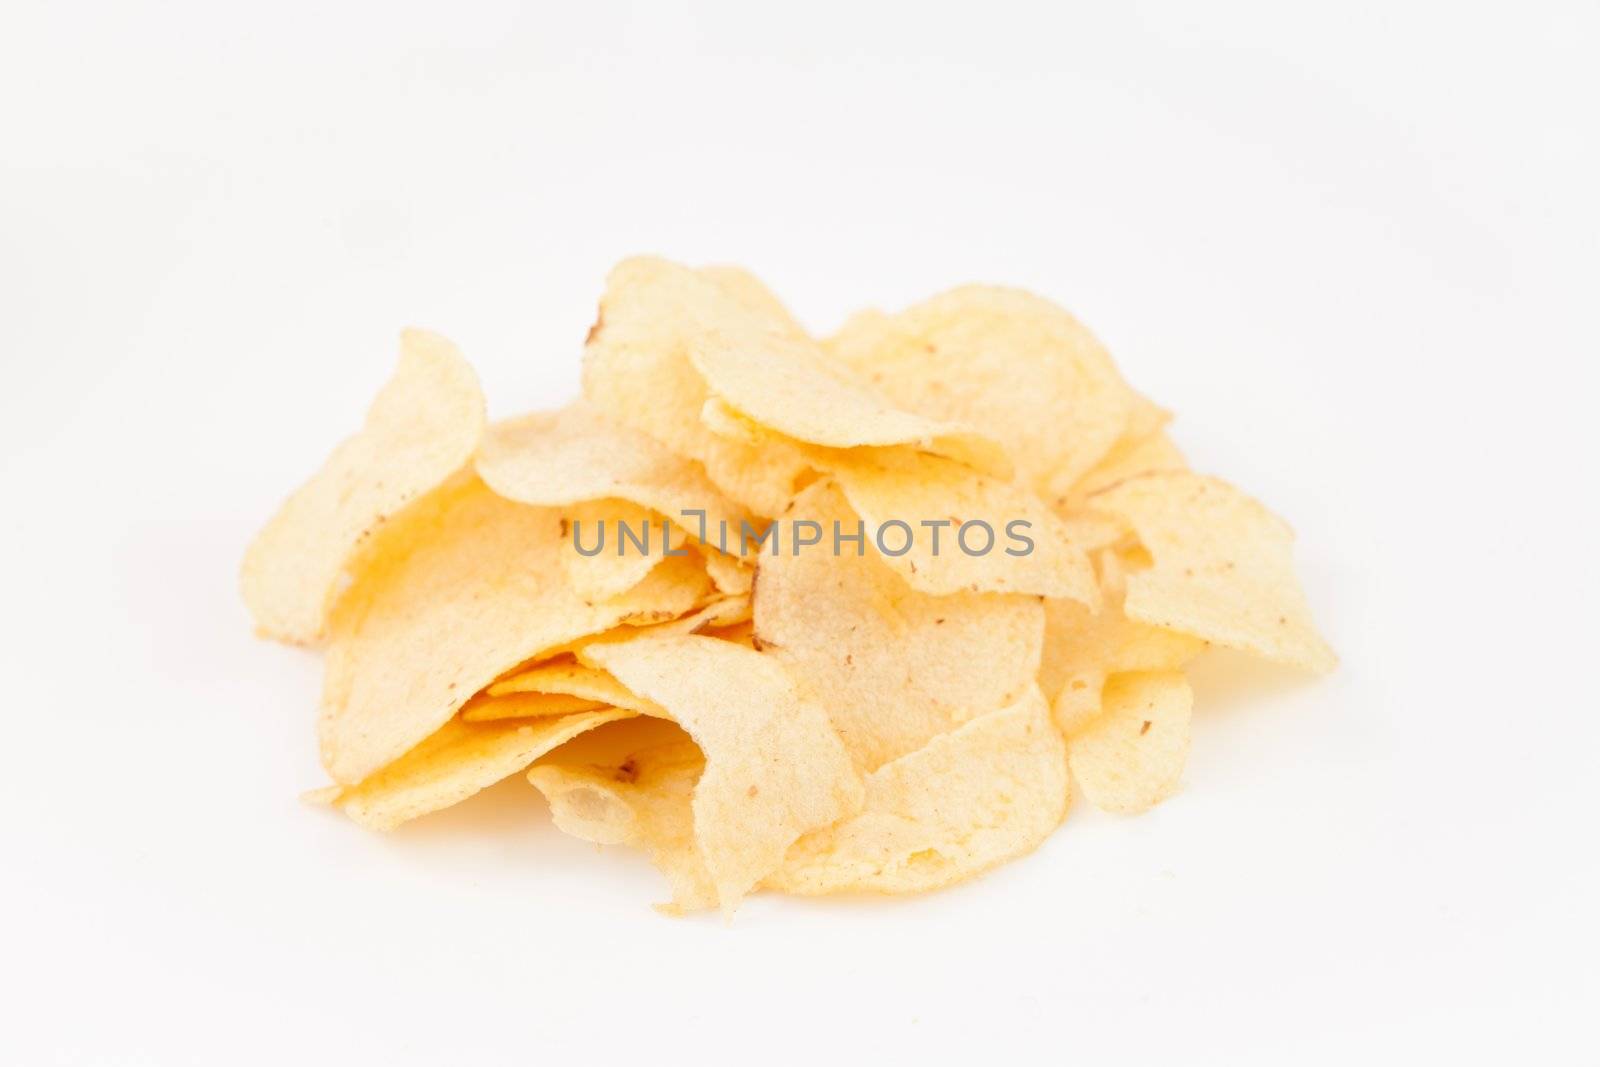 Stack of chips against white background